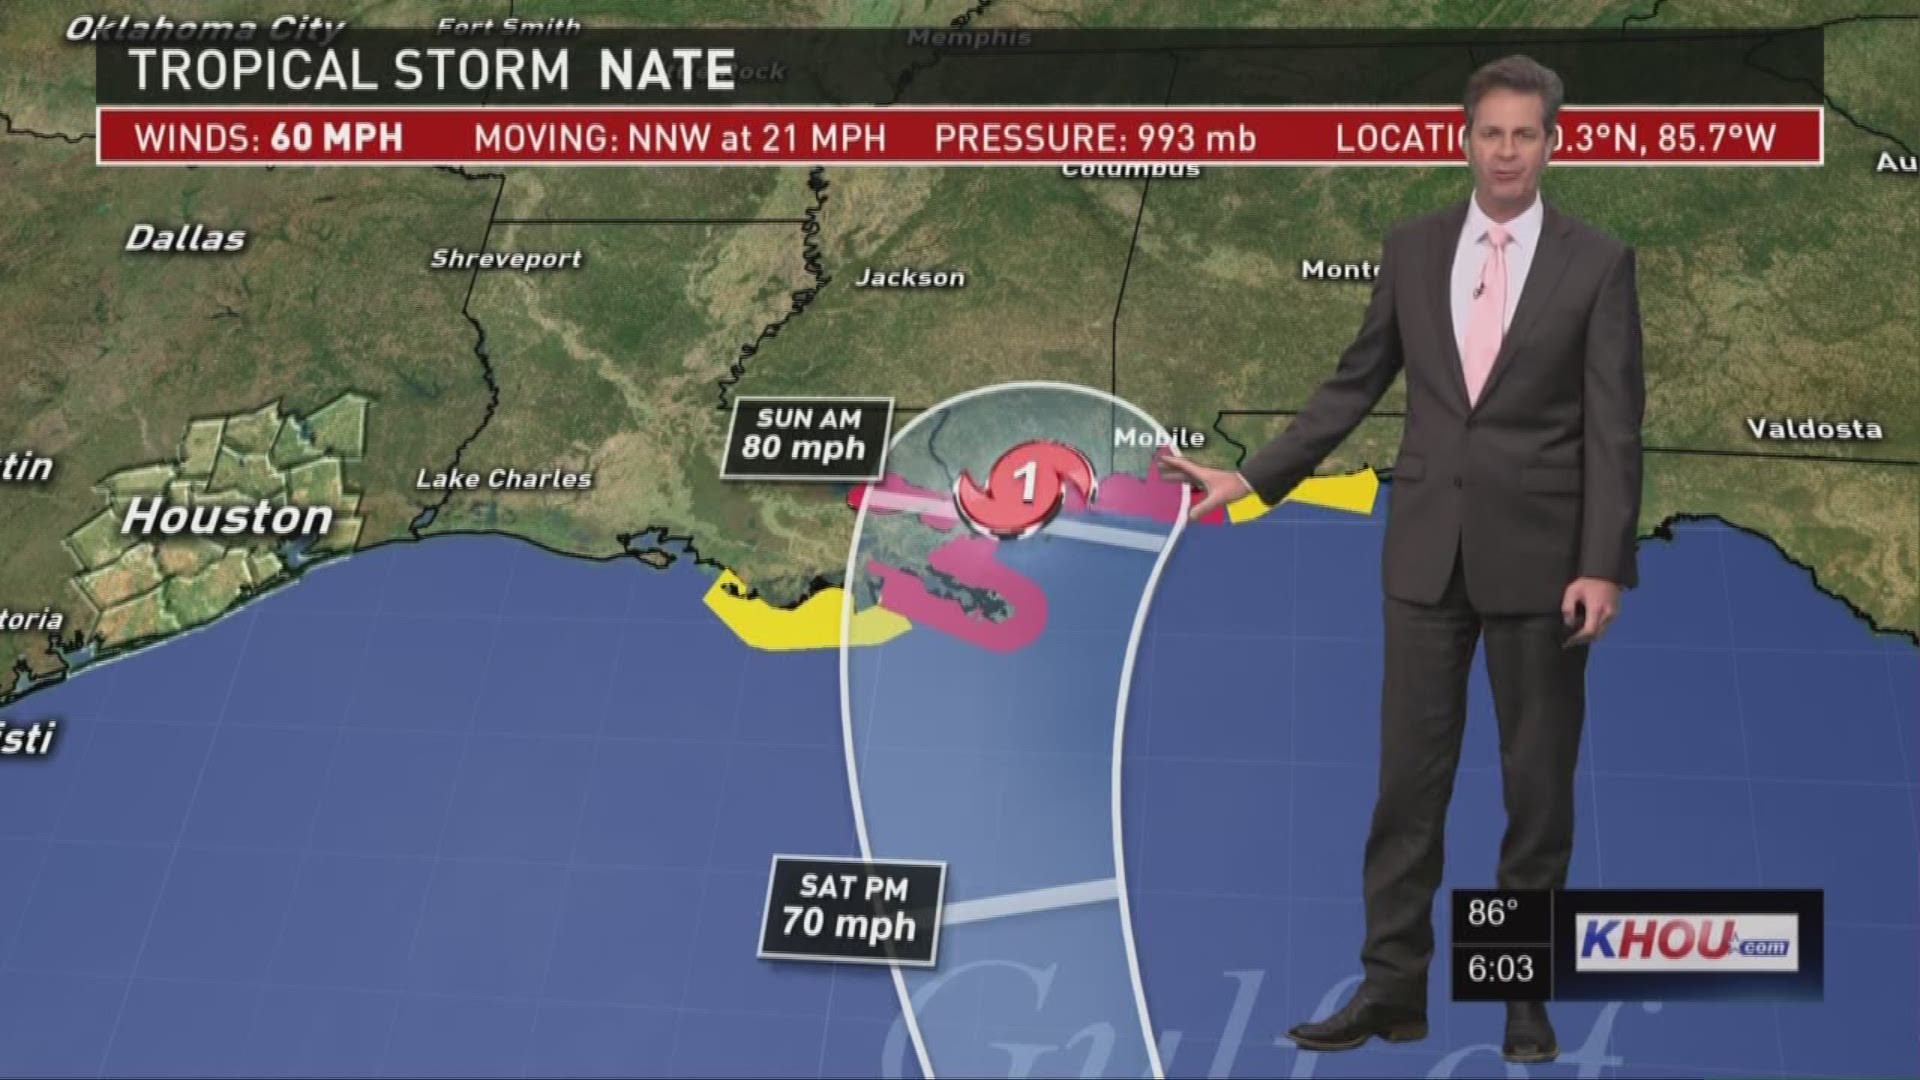 Tropical Storm Nate is moving north and is expected to impact Louisiana and Alabama.